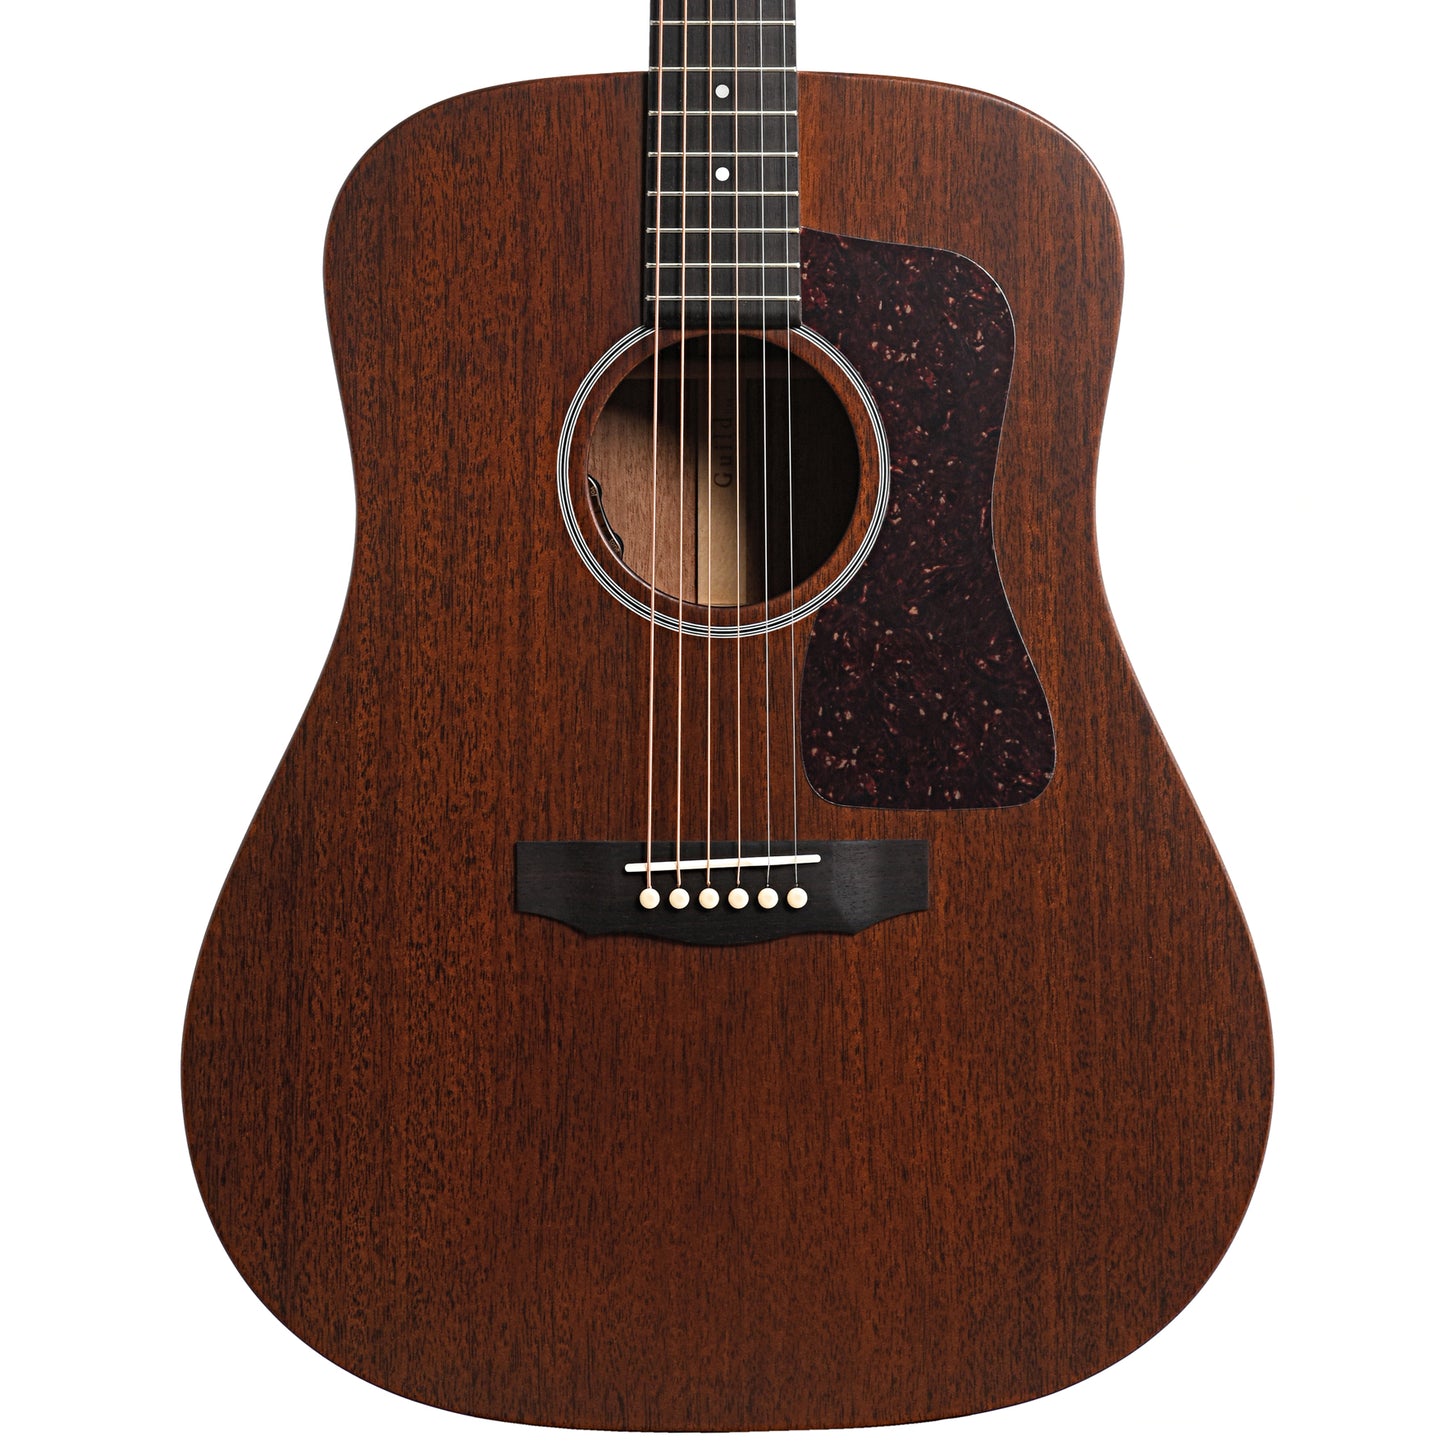 Image 4 of Guild USA D-20E Acoustic Guitar with Pickup & Case - SKU# GUID20E : Product Type Flat-top Guitars : Elderly Instruments